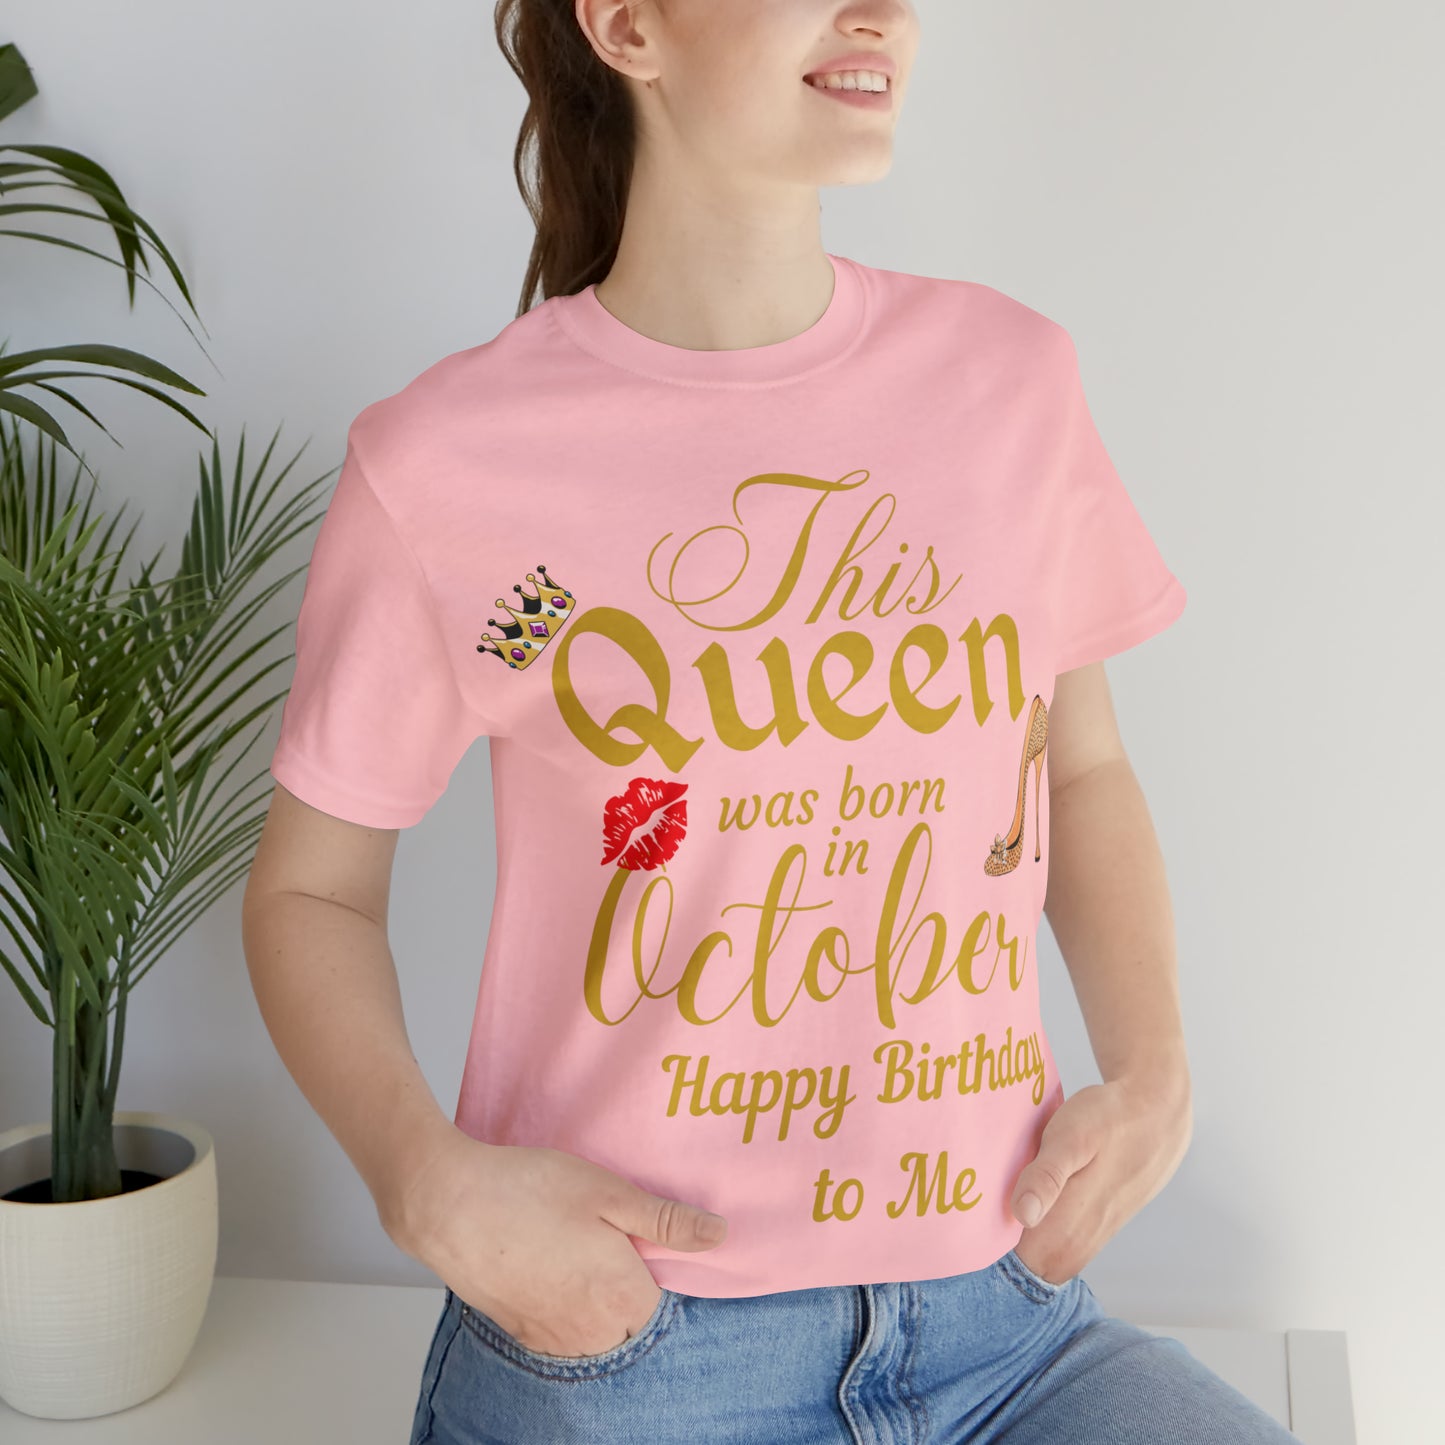 Birthday Queen Shirt, Gift for Birthday, This Queen was born in October Shirt, Funny Queen Shirt, Funny Birthday Shirt, Birthday Gift